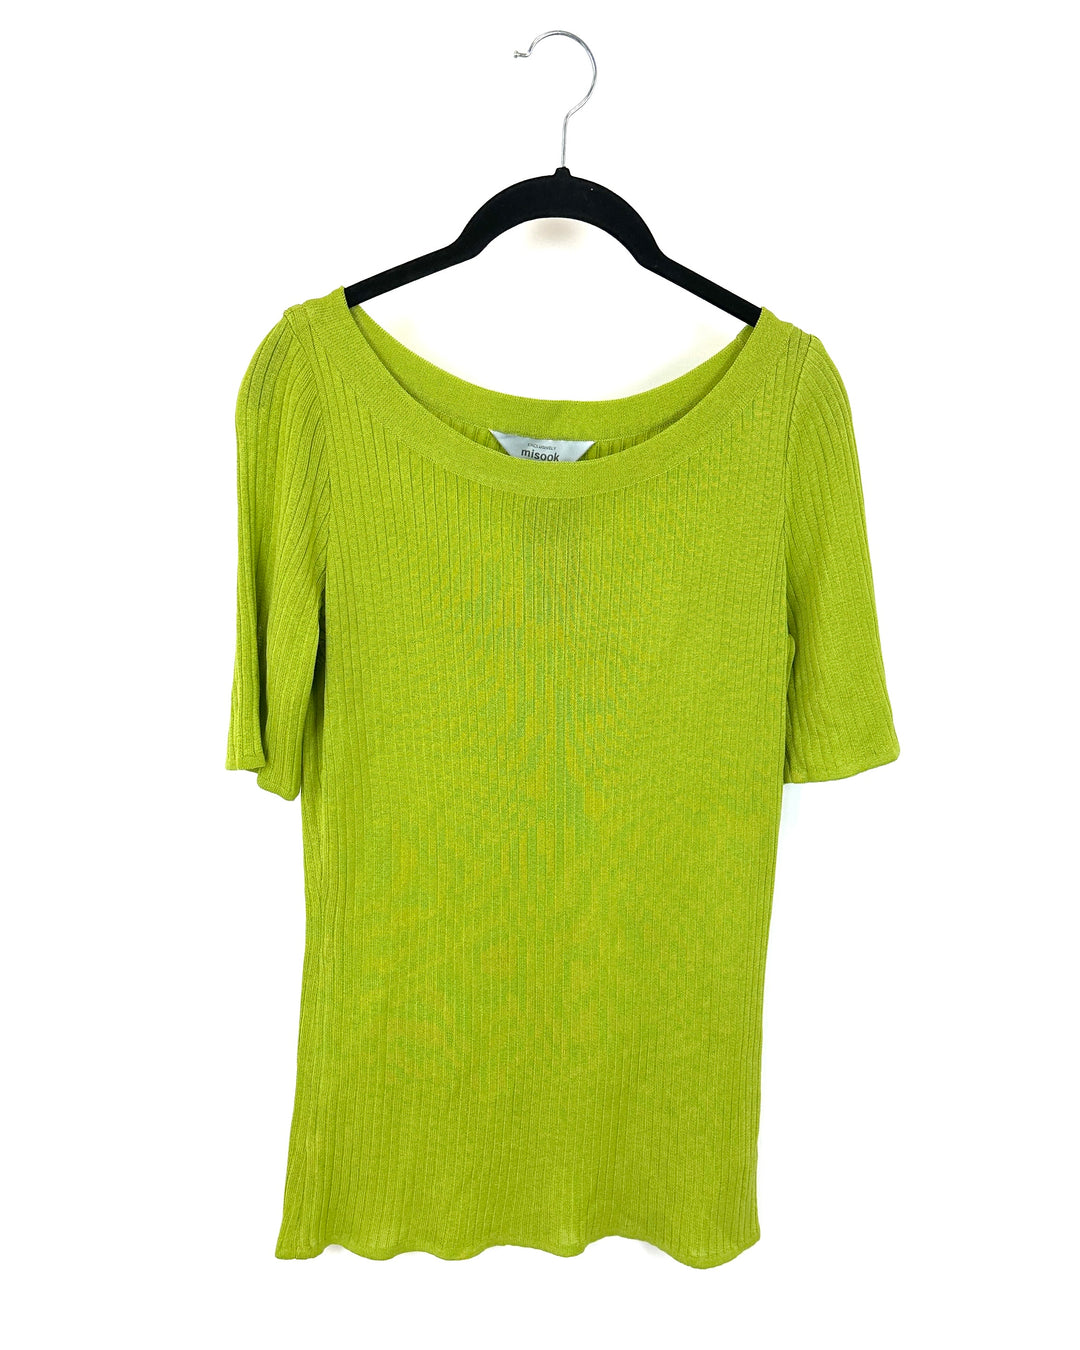 Olive Green Top - Size 2-4